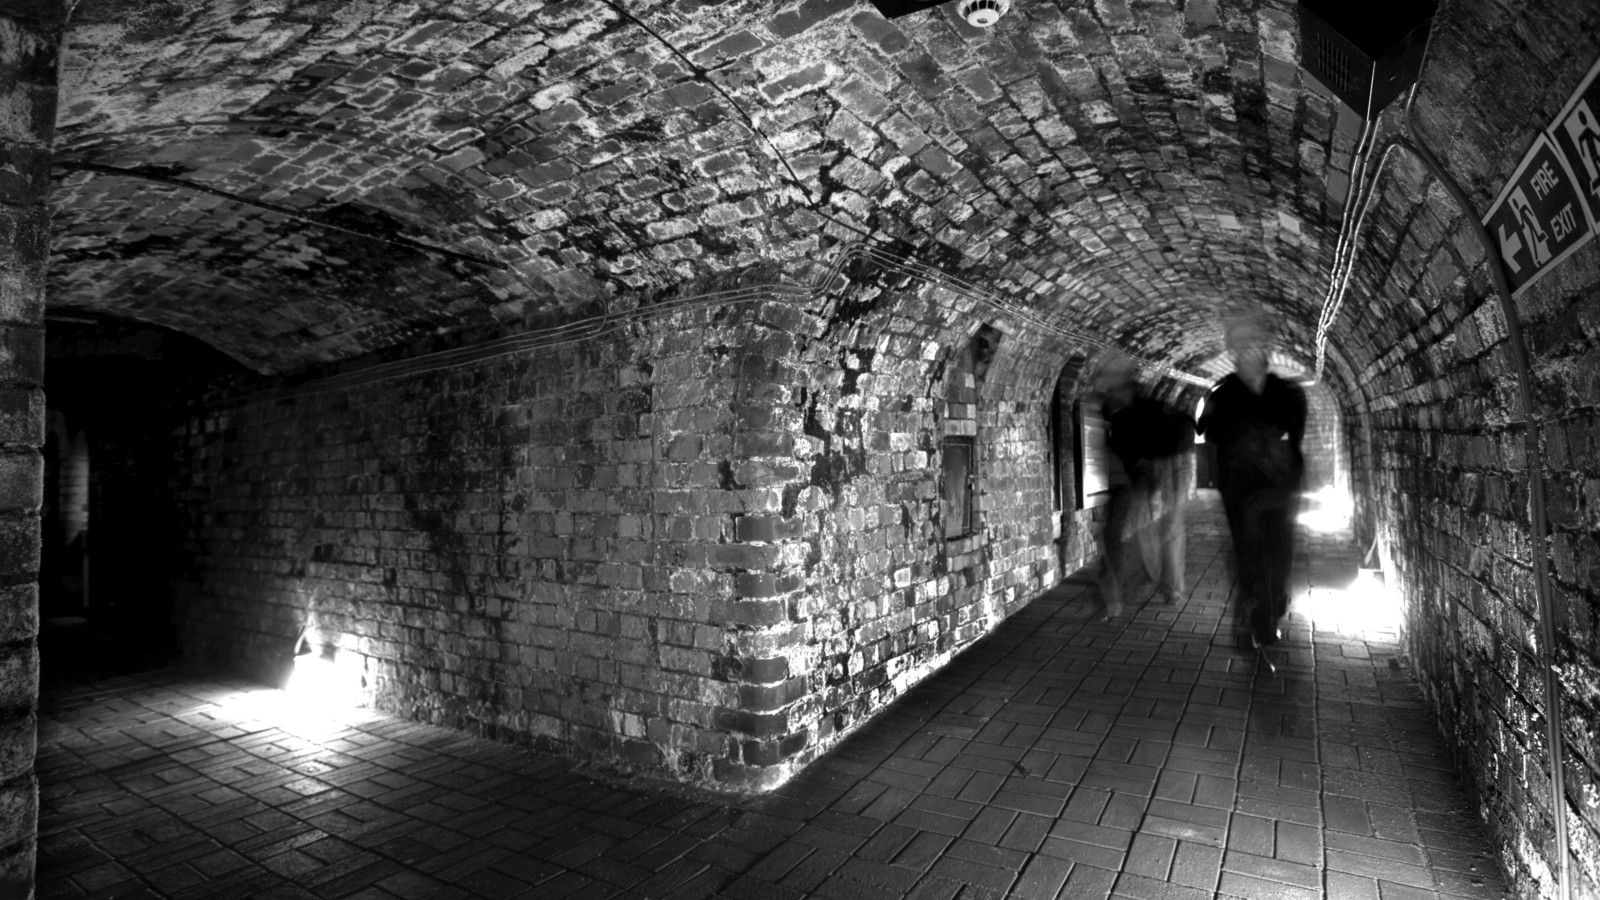 A black and white photograph of dark, brick tunnels lit by a small amount of lights at ground level. Two blurred figures are walking through the tunnels.